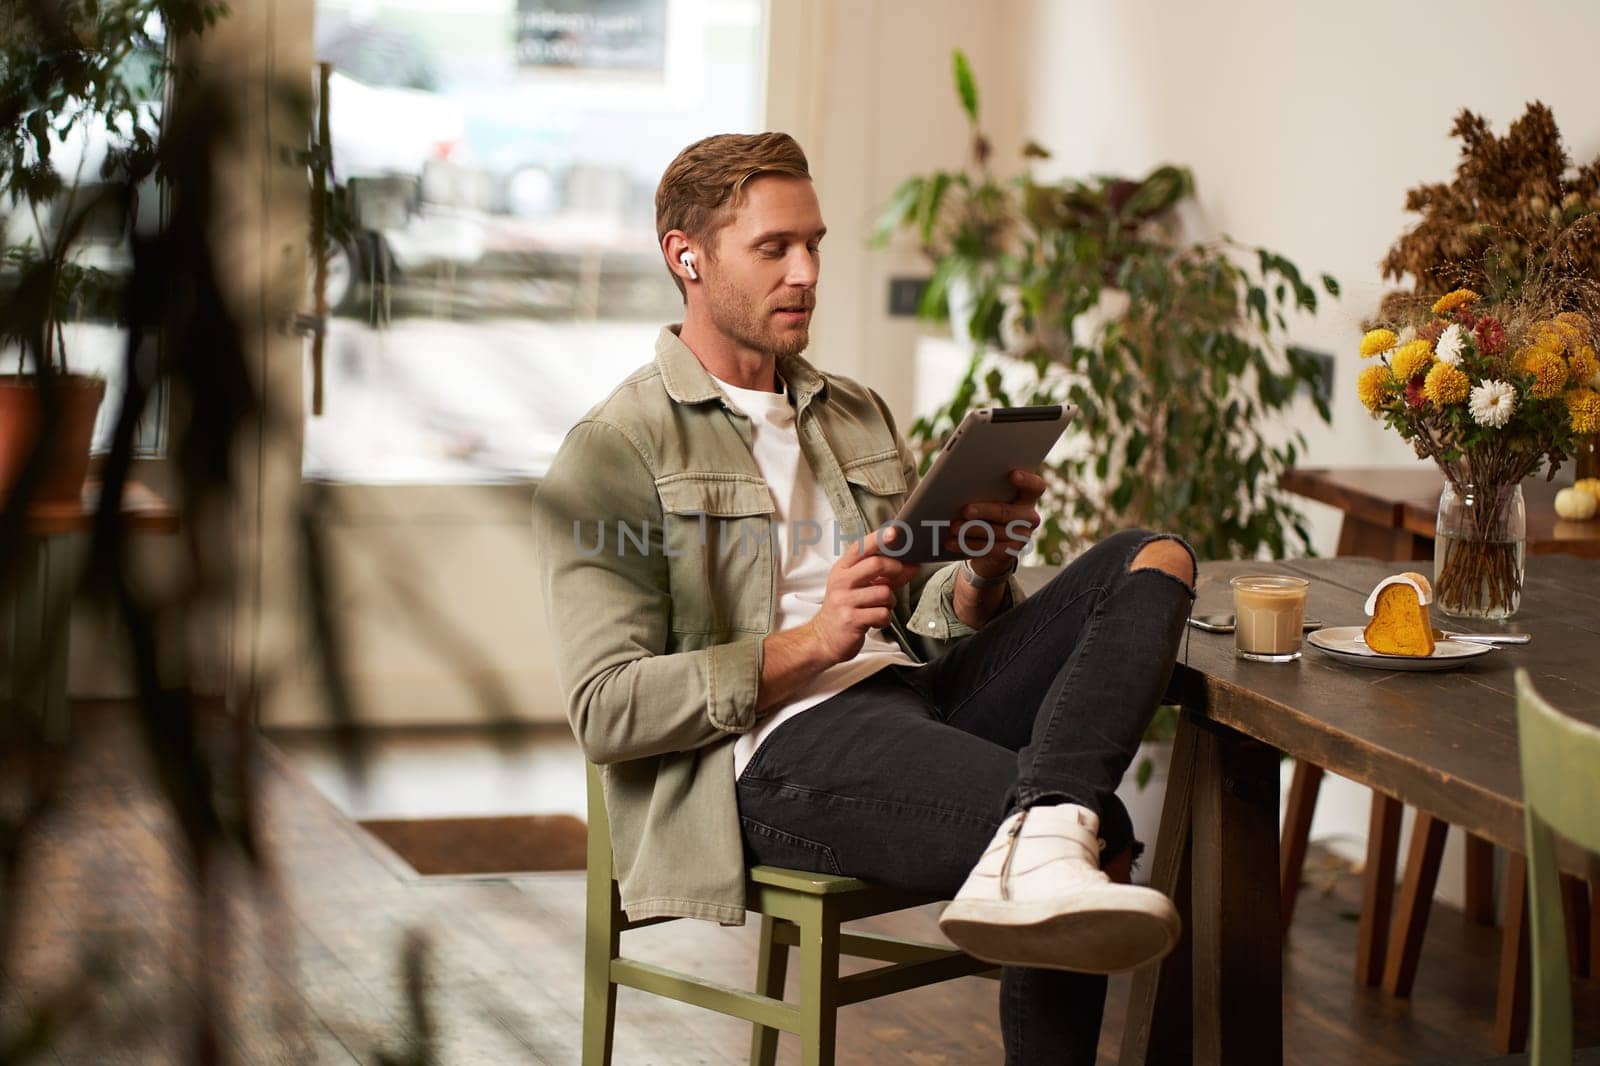 Lifestyle shot of handsome young man sitting in a cafe in front of the table, drinking coffee, wearing wireless headphones, listening to music or watching video in public space, using digital tablet.